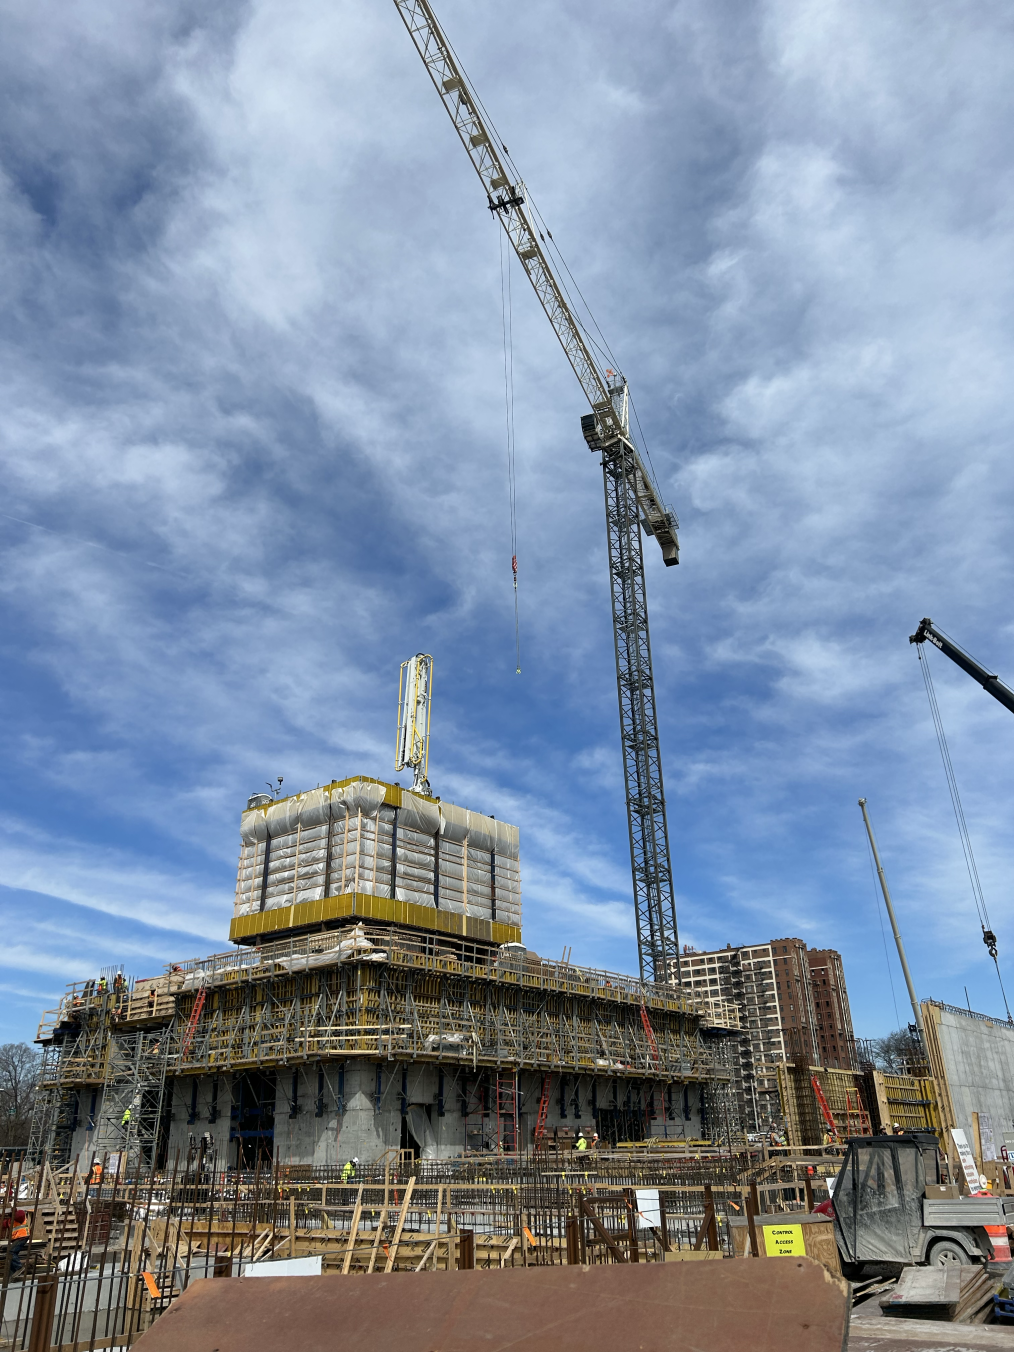 A construction crane towers over a building site with a partially built building. The sky is deep blue with wispy clouds.